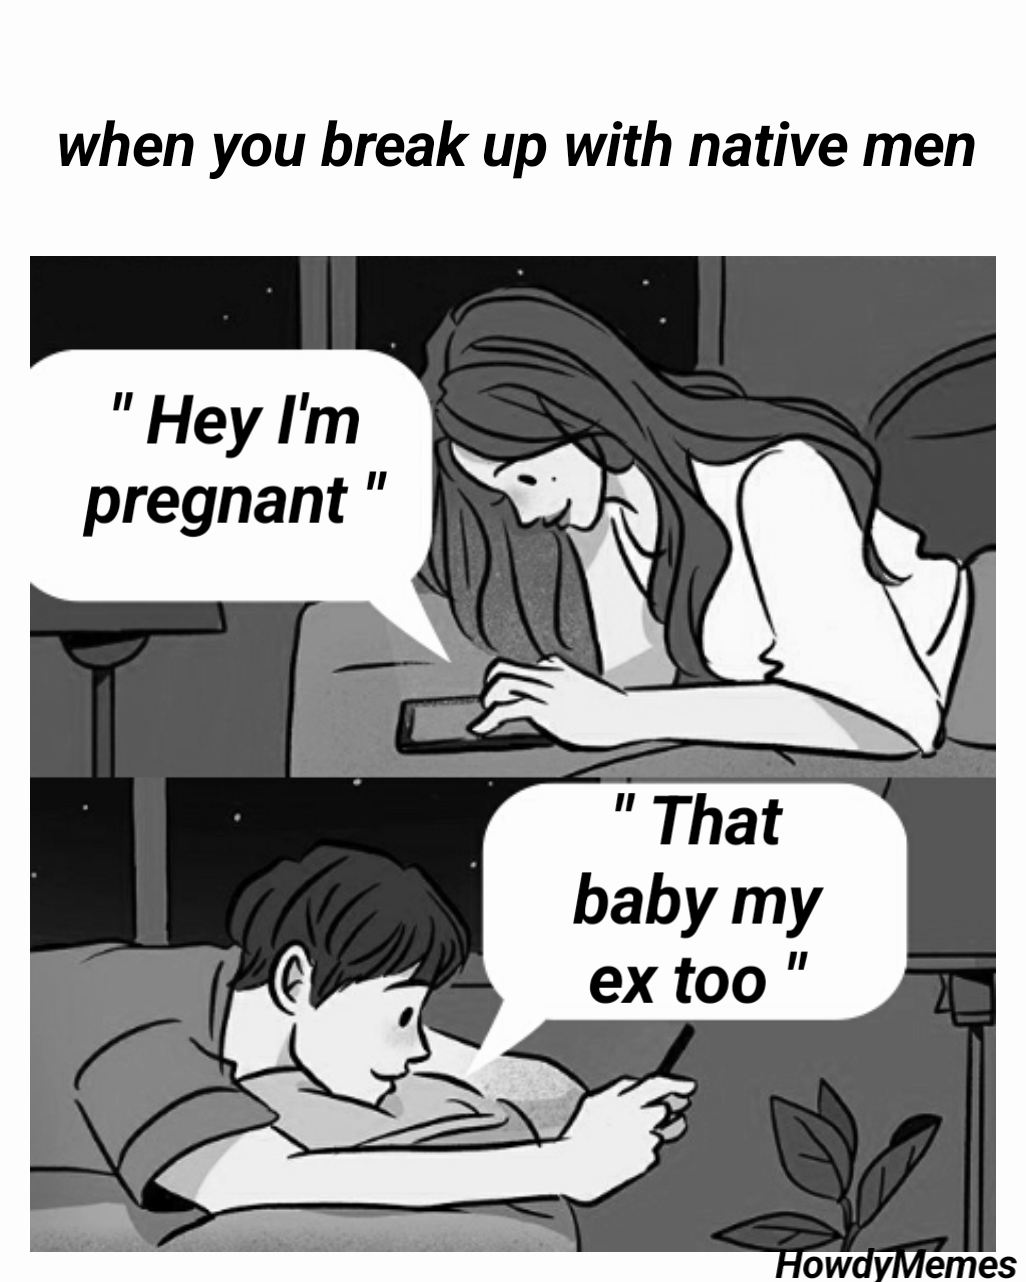 HowdyMemes  when you break up with native men   " Hey I'm pregnant " " That baby my ex too "